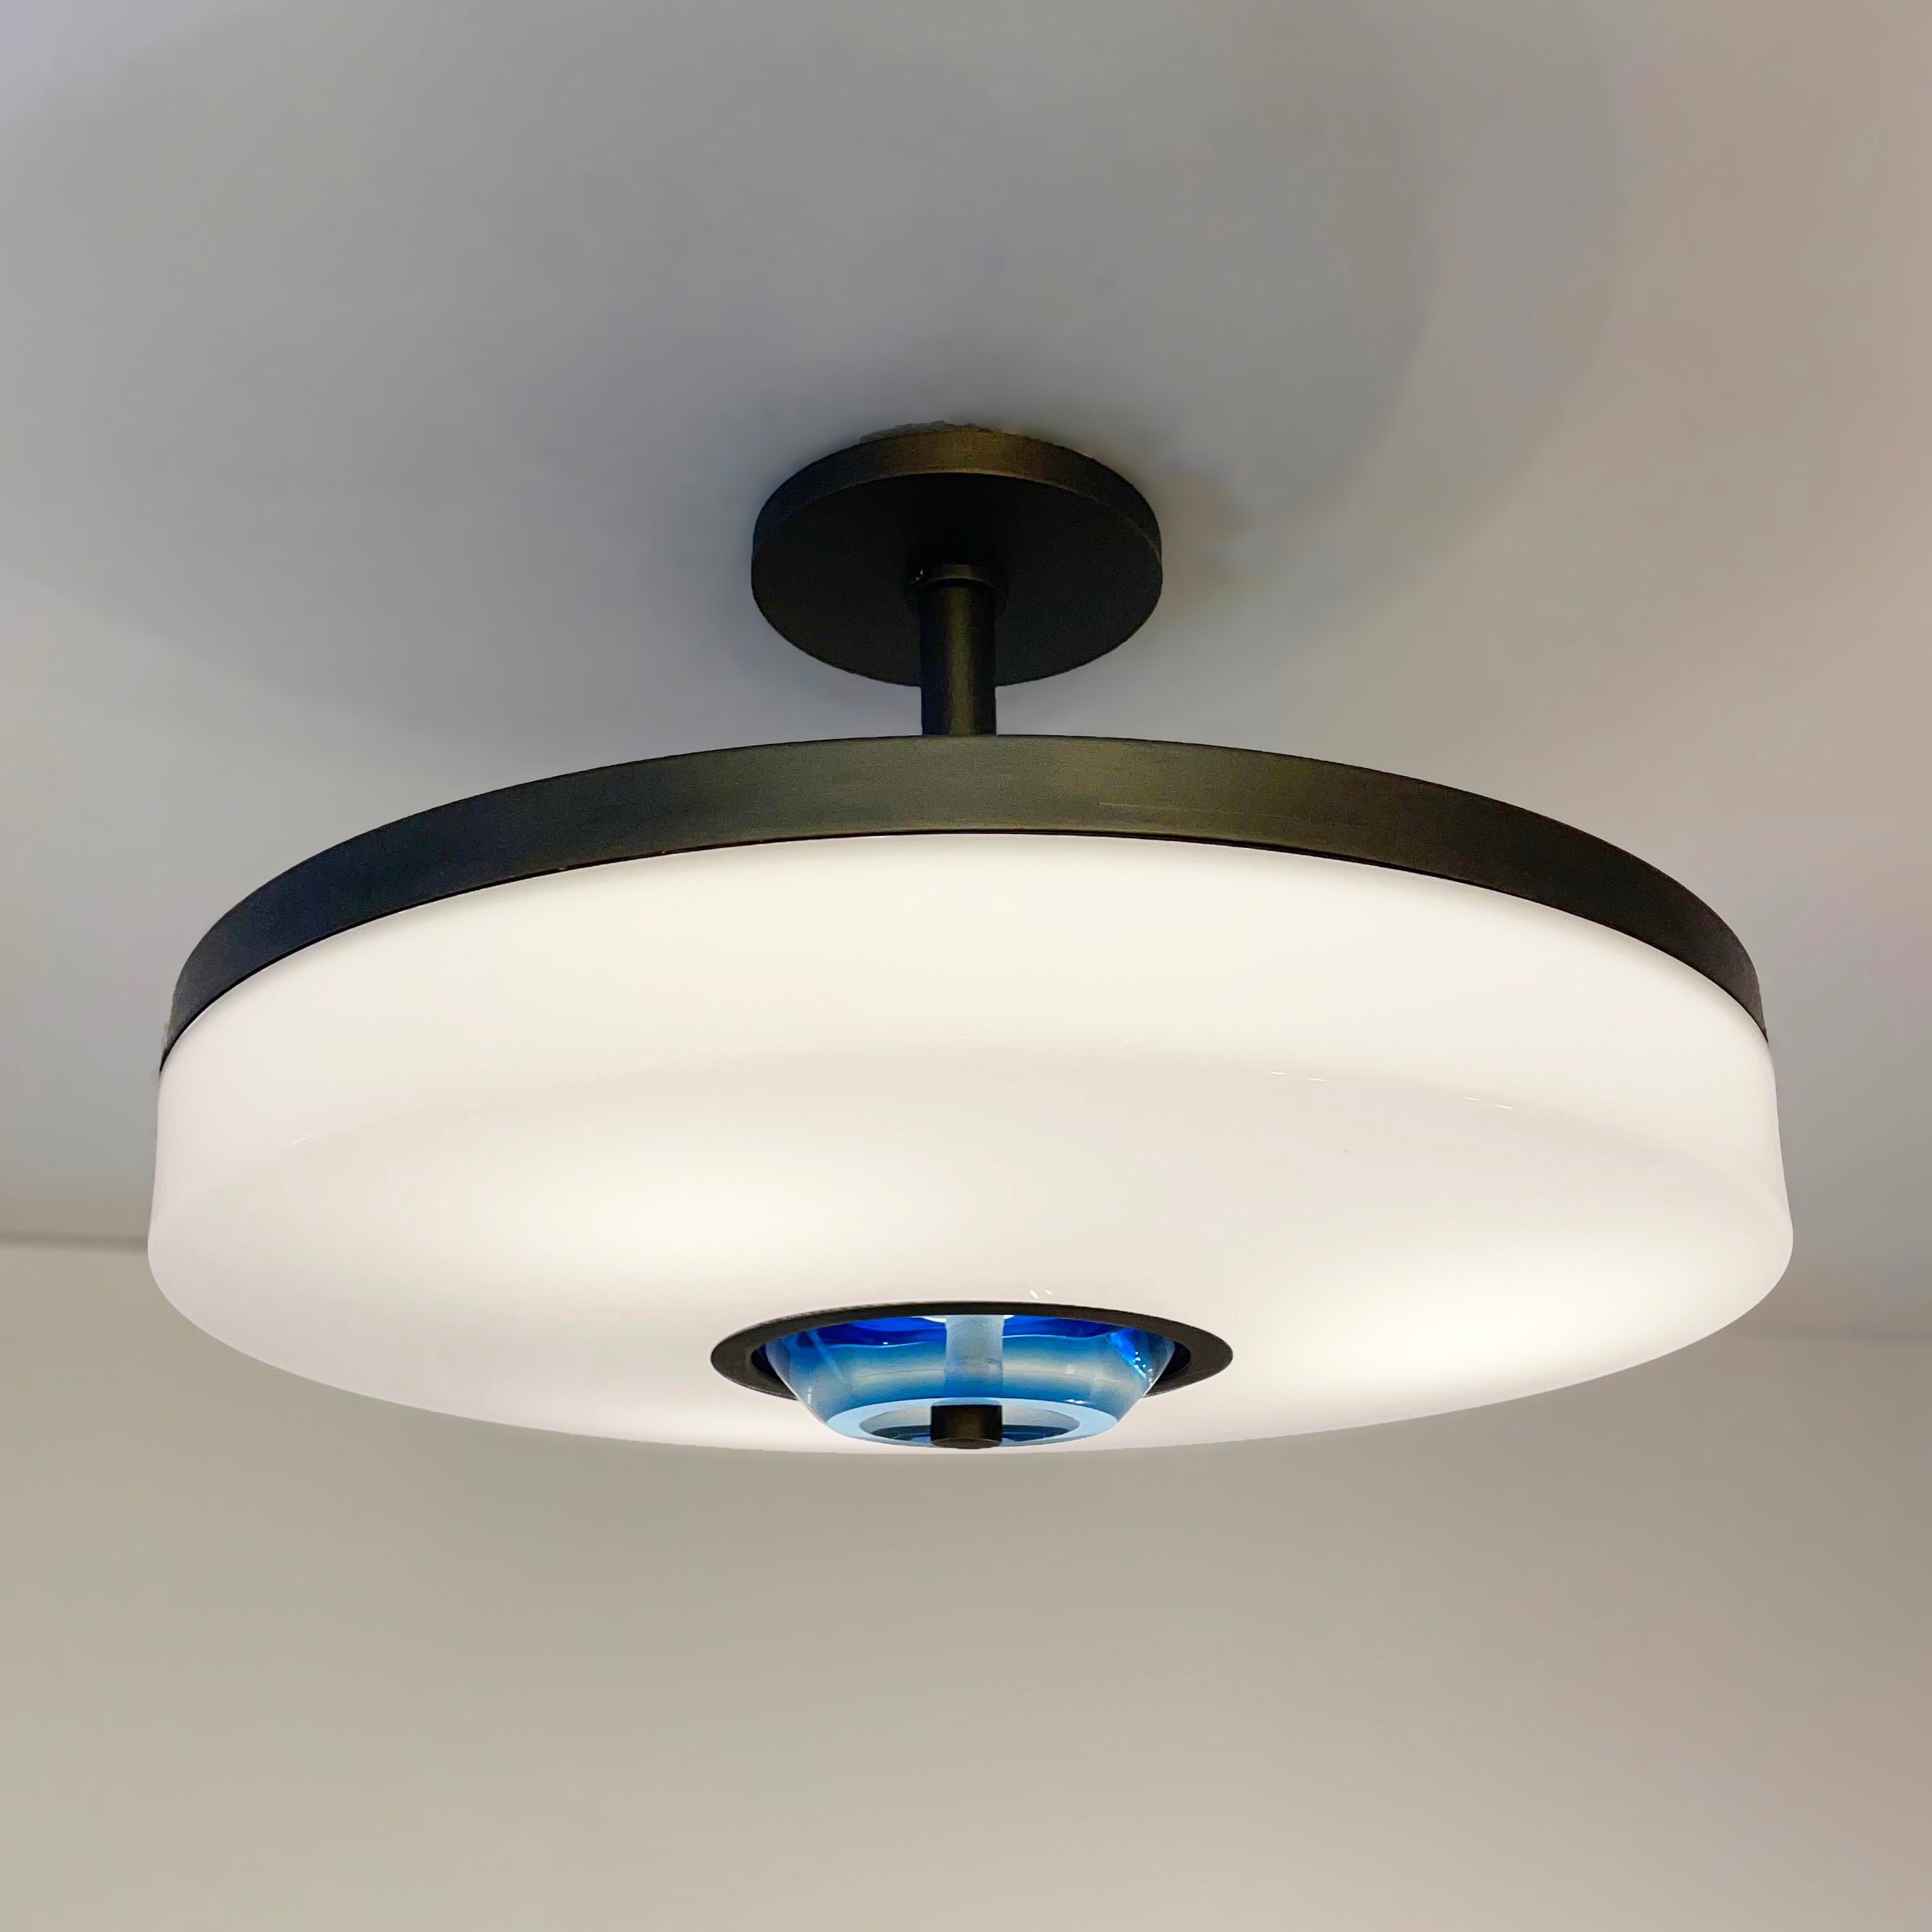 The Iris Piccolo ceiling light is designed around an expansive acrylic shade with a hand carved glass center. This versatile fixture can be installed as a pendant on a stem or as a true flush mount. Shown in our Brunito Nero finish. Price listed for